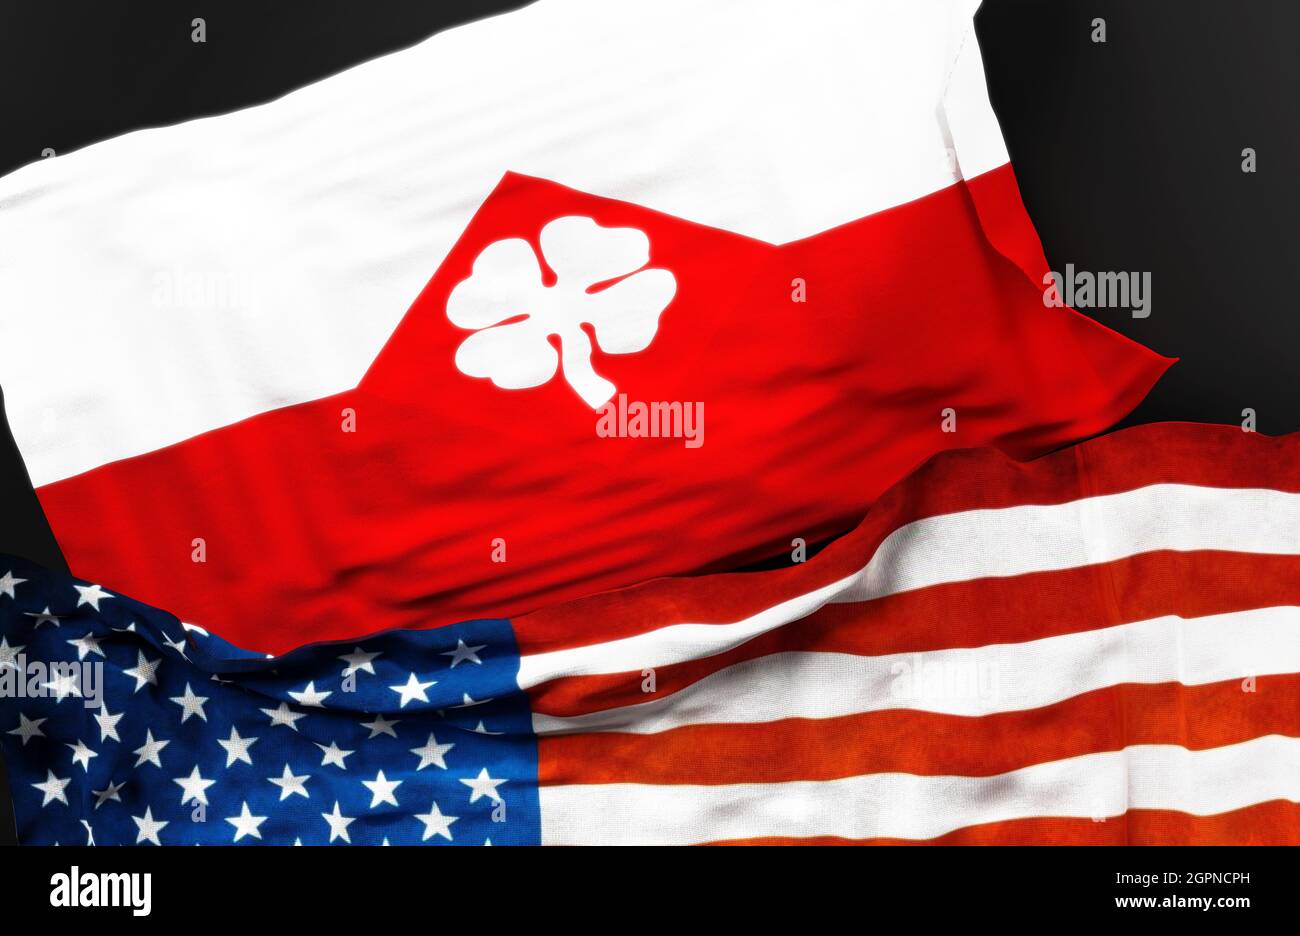 Flag of the Fourth United States Army along with a flag of the United States of America as a symbol of unity between them, 3d illustration Stock Photo